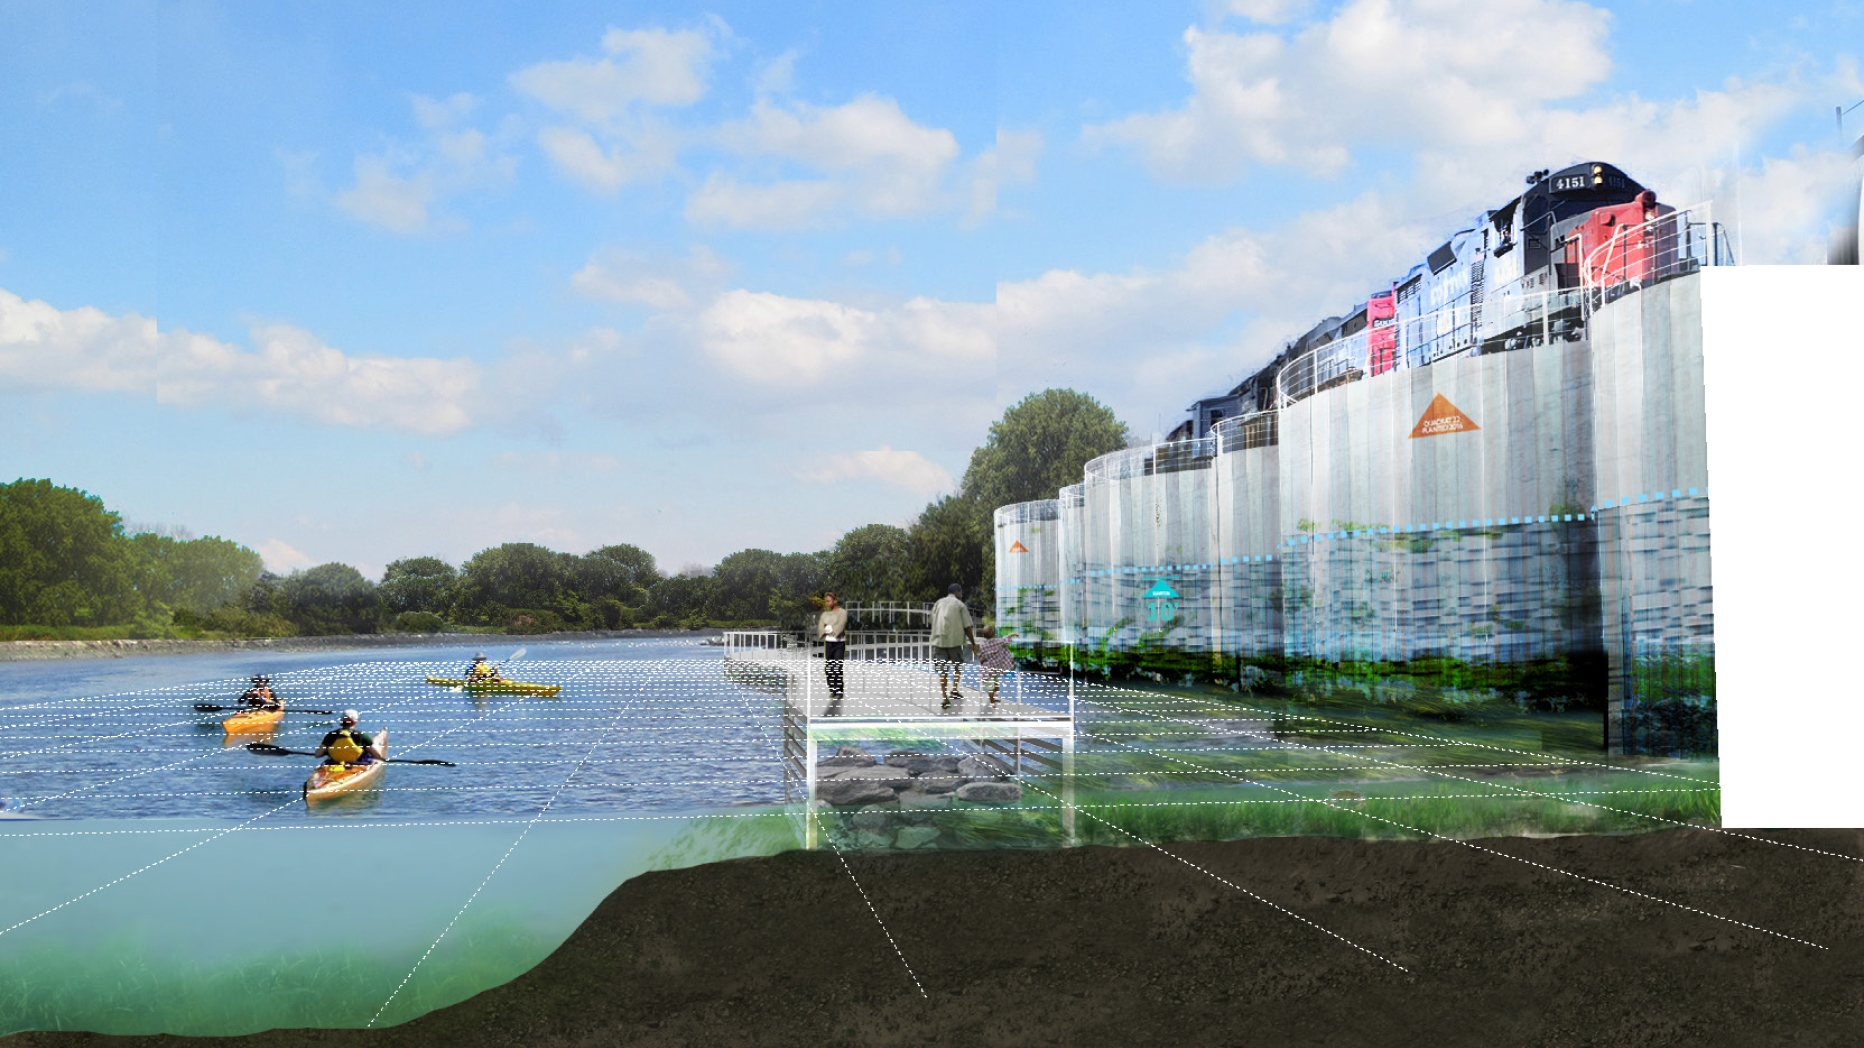 Rendering of multilevel flood walls, people rowing in river, walking on boardwalk and a train going by high up on land